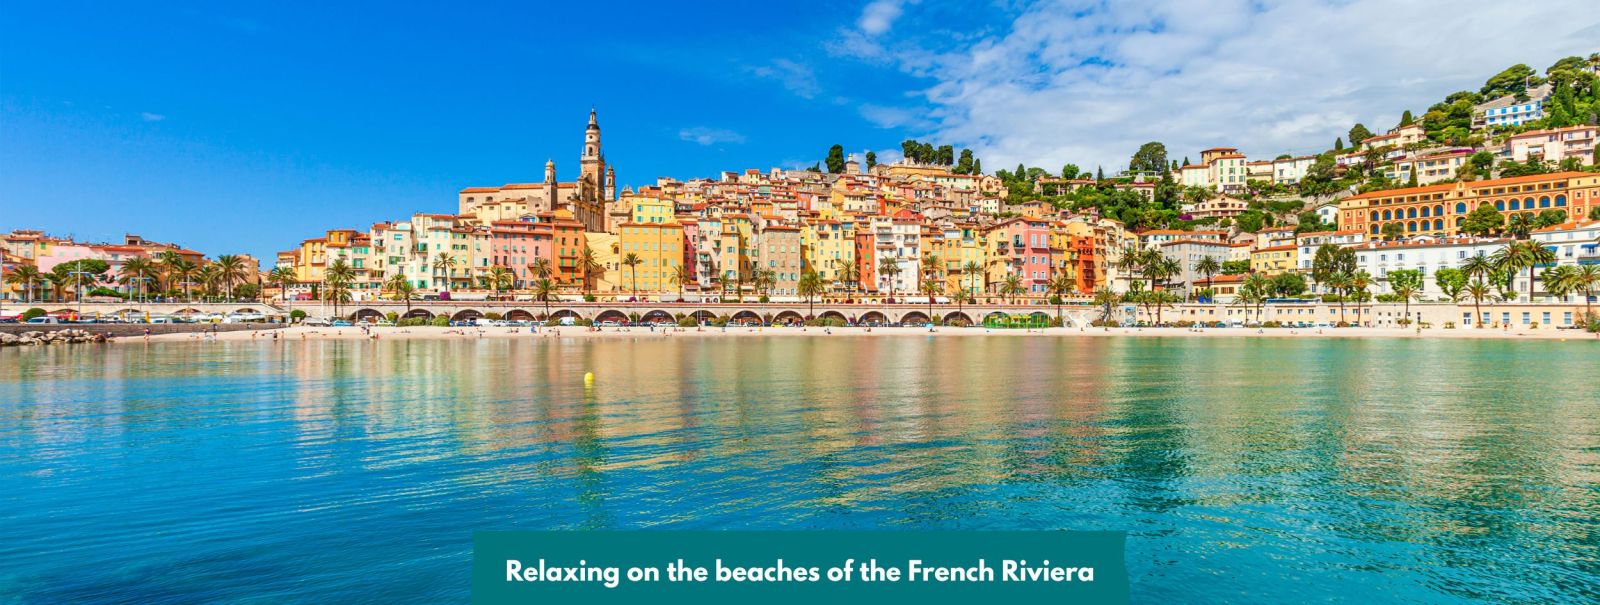 Relaxing on the beaches of the French Riviera